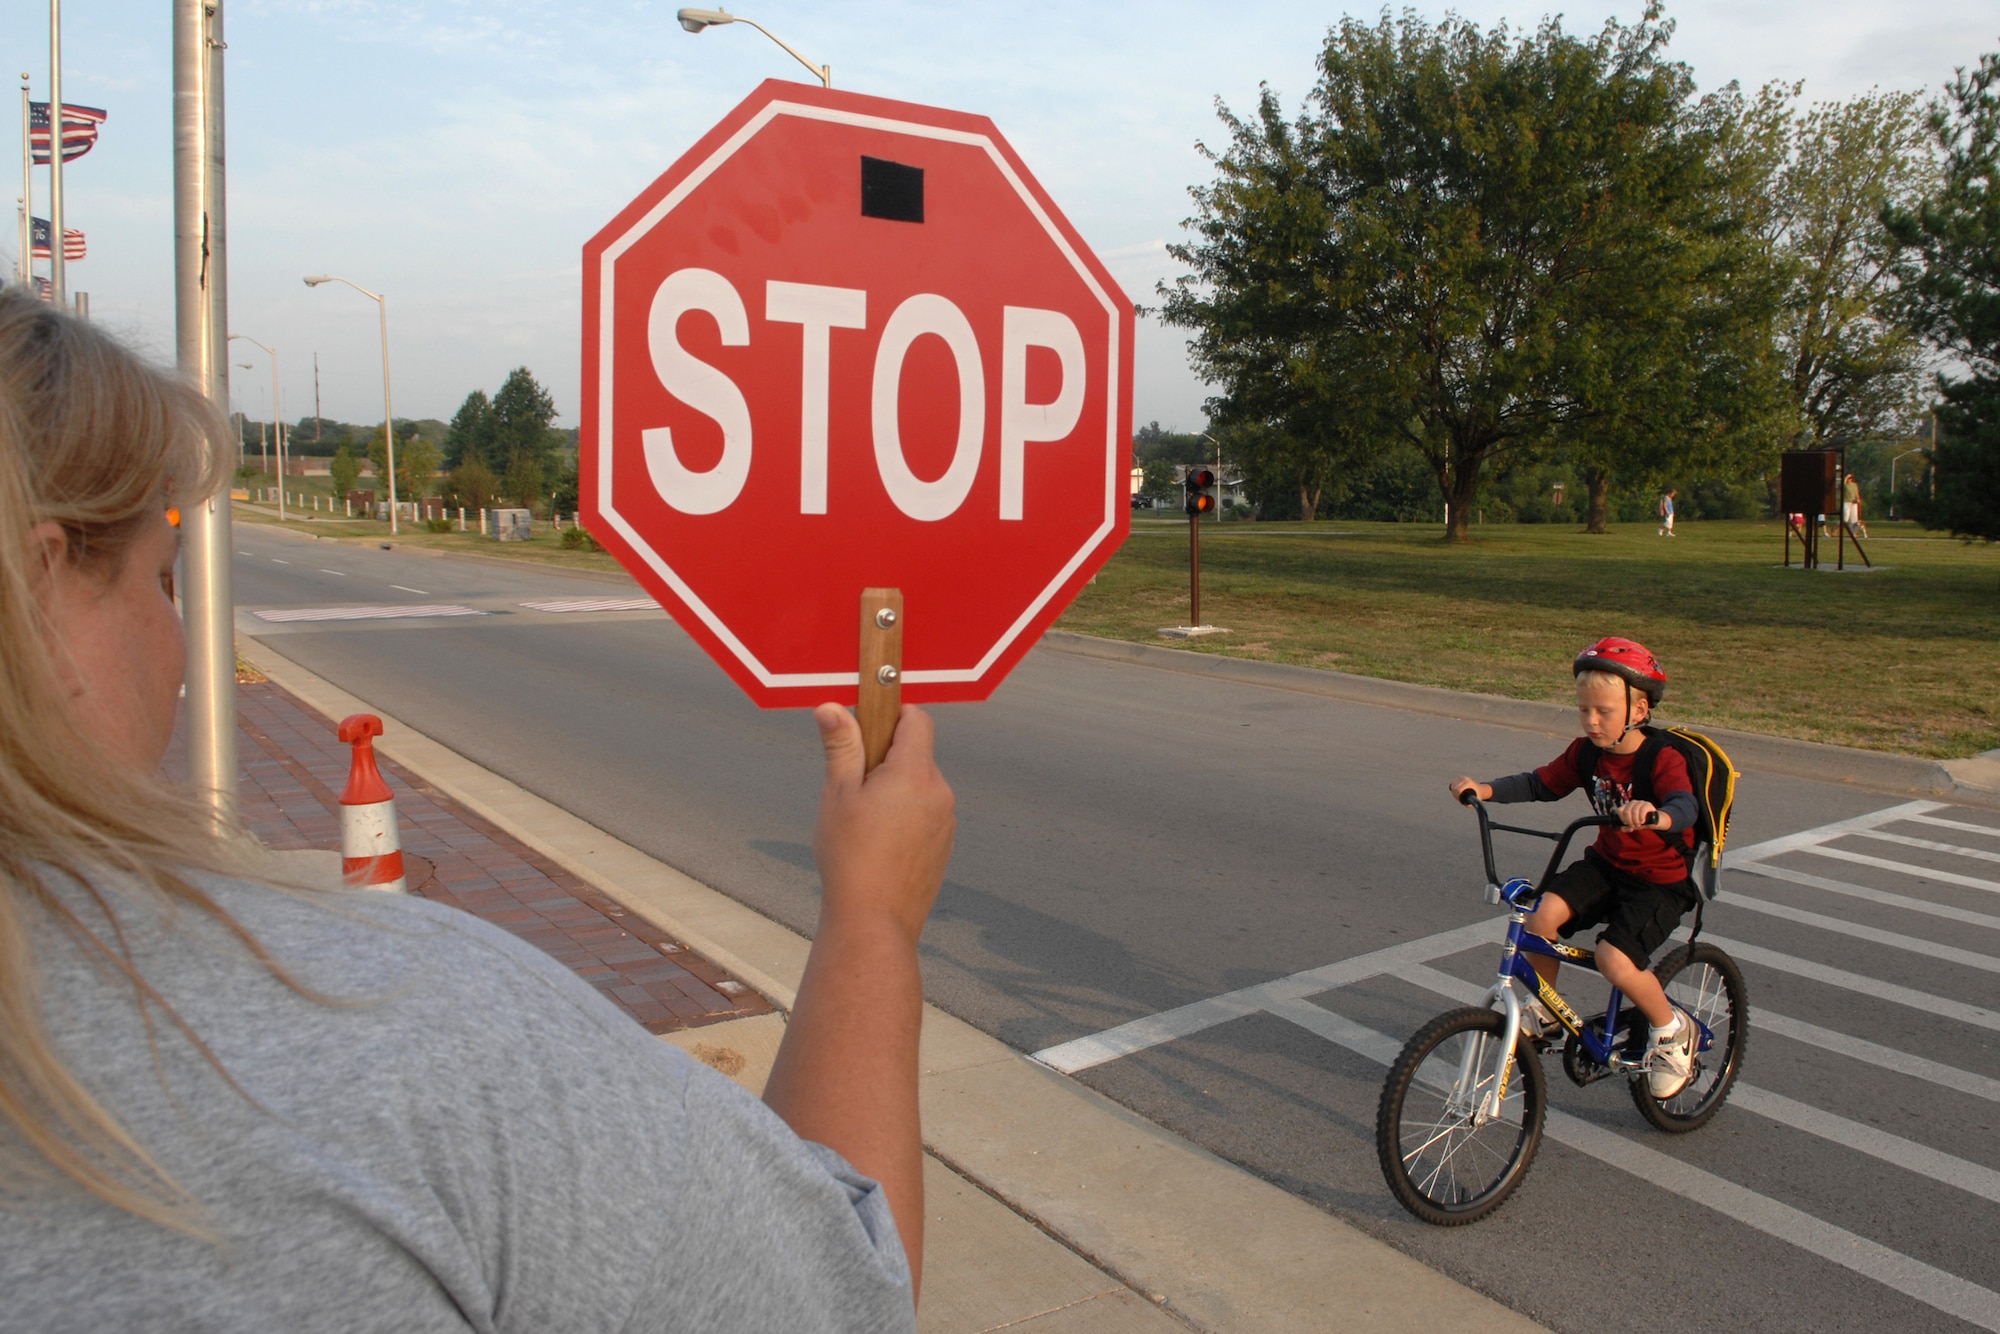 WHITEMAN AIR FORCE BASE, Mo – Mrs. Tonya Walher, a crosswalk guard, holds up a stop sign bringing traffic to a halt so a child can safely make his way to school Aug. 28.  School is back in session and that, coupled with the increased traffic flow caused by the Arnold Gate closure, makes crosswalk safety imperative. (U.S. Air Force photo/Senior Airman Jessica Snow)
